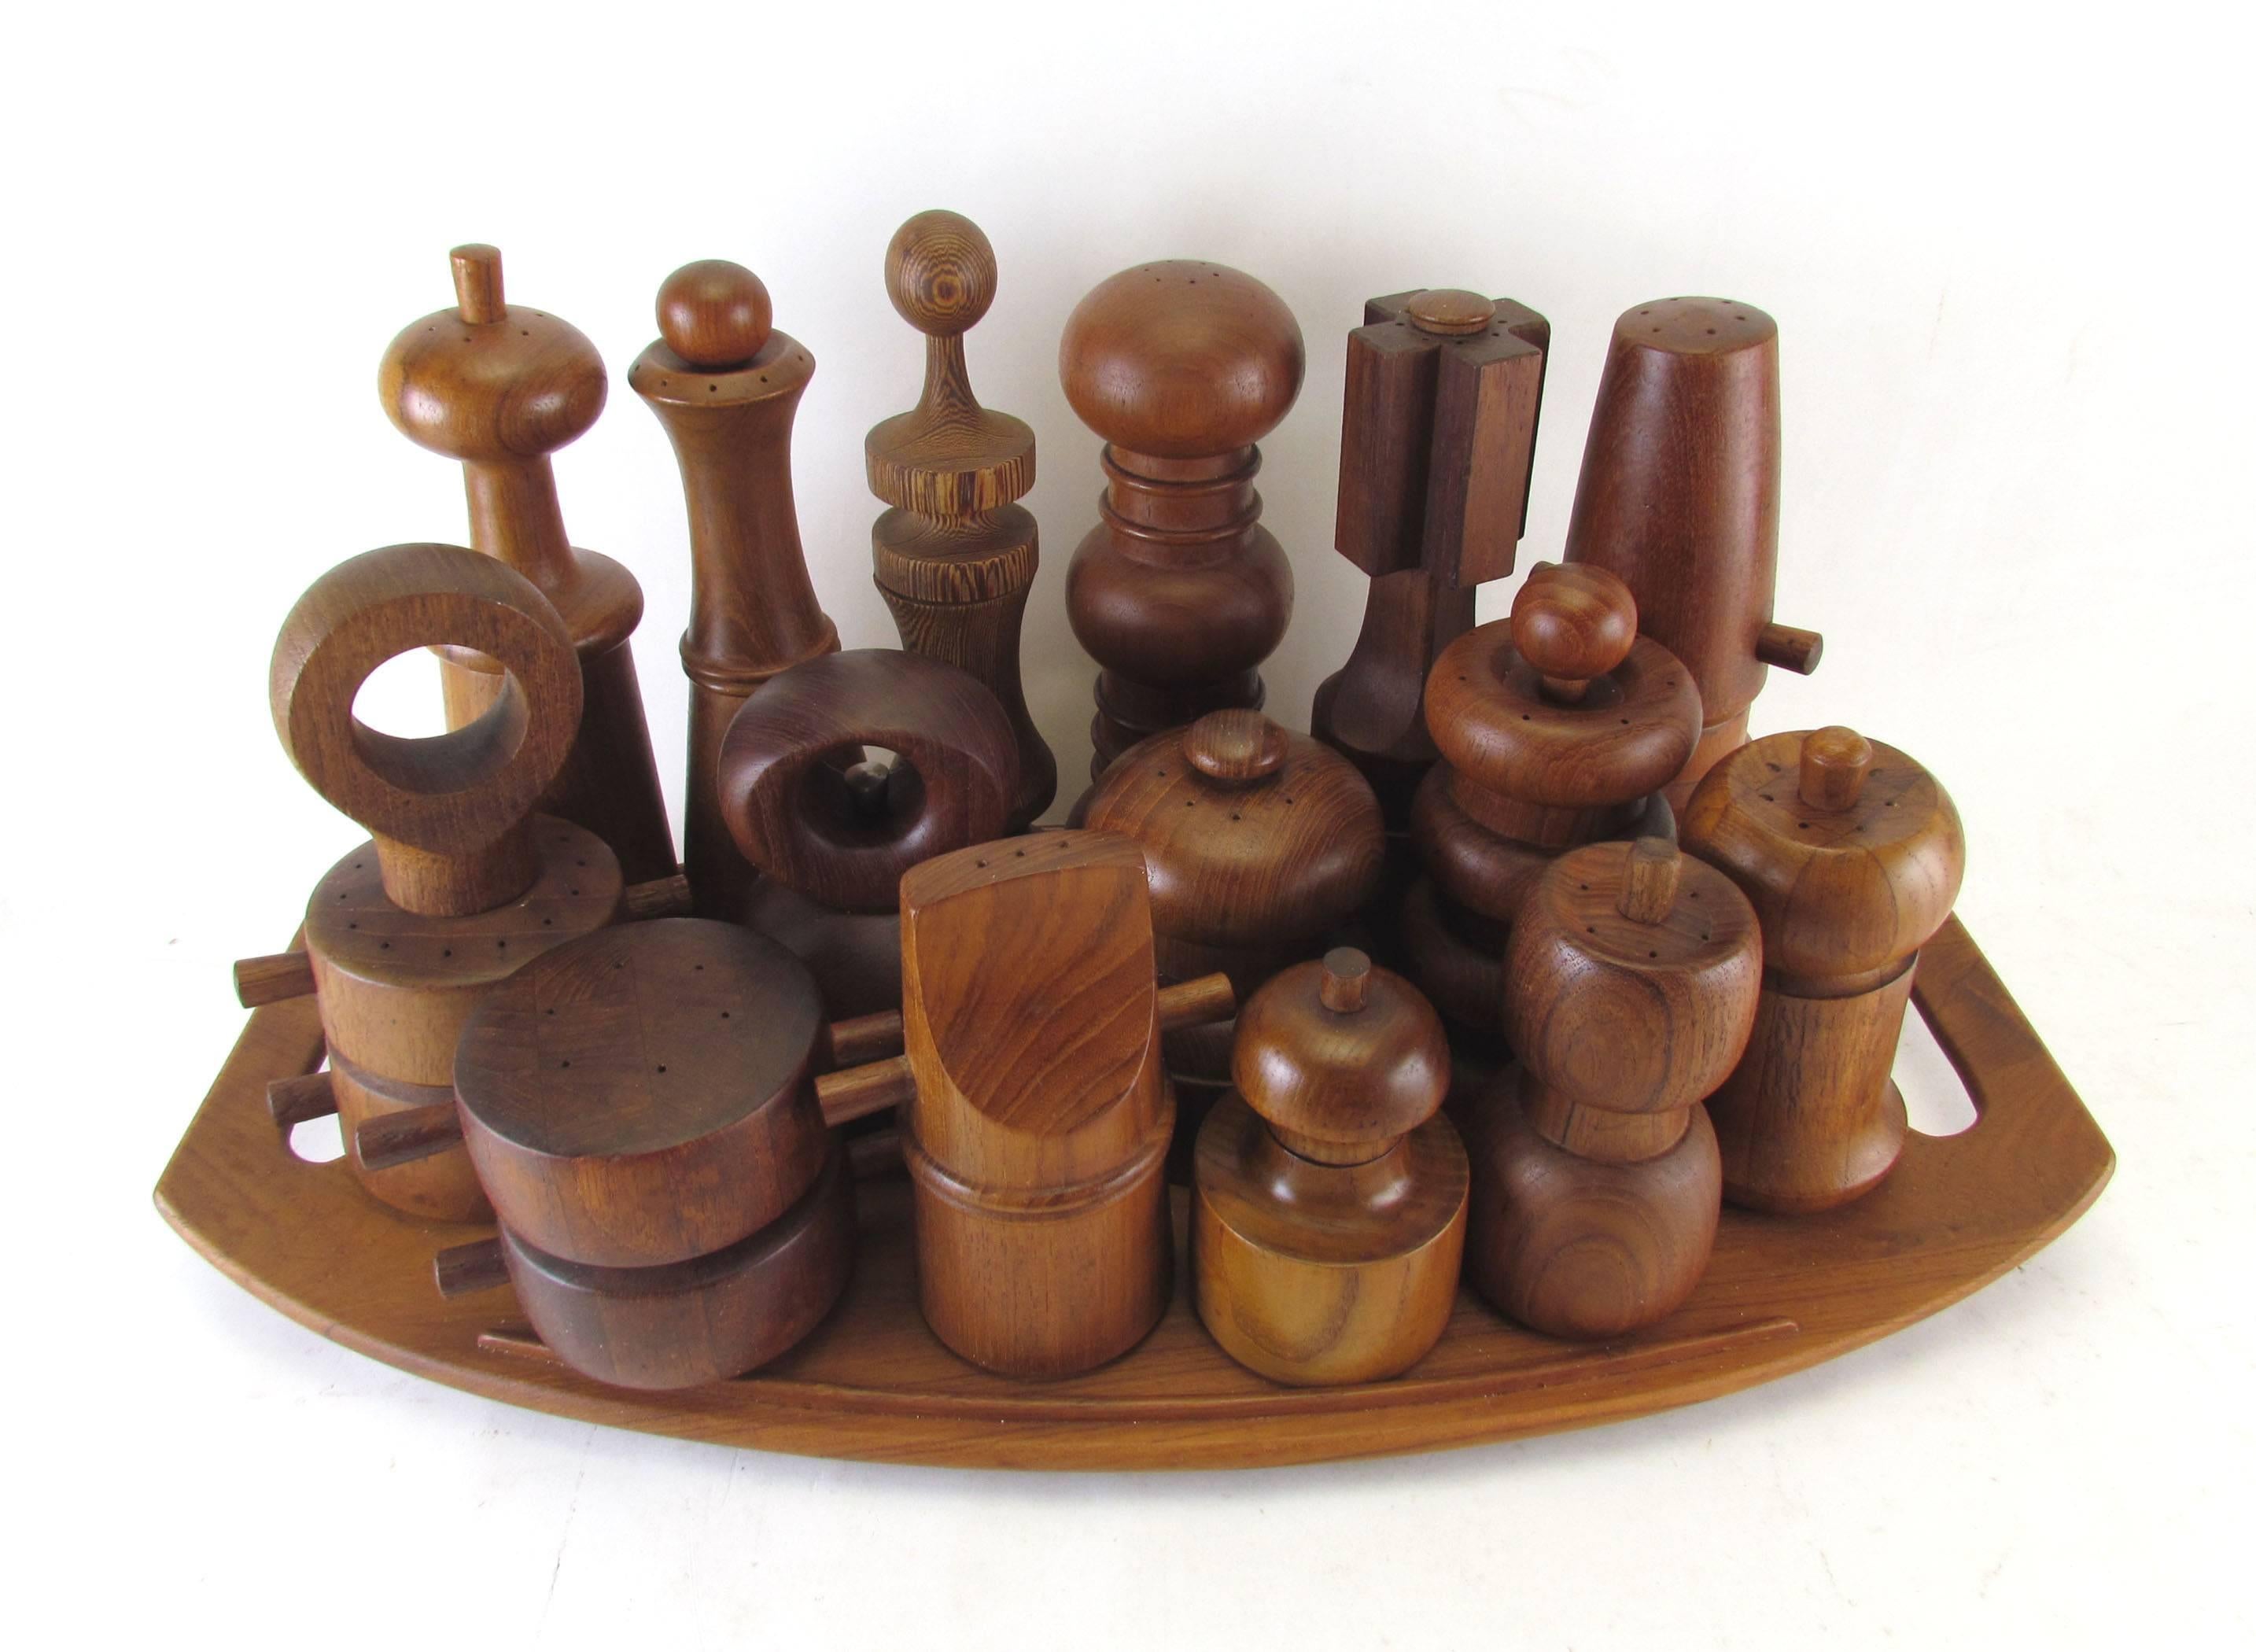 A collection of 15 Danish modern pepper mills, circa 1960s-1970s. The majority are teak and include mills by Jens Quistgaard for Dansk, Michael Lax for Copco, and Laurids of Lonborg, Denmark. These range in size from 4.25